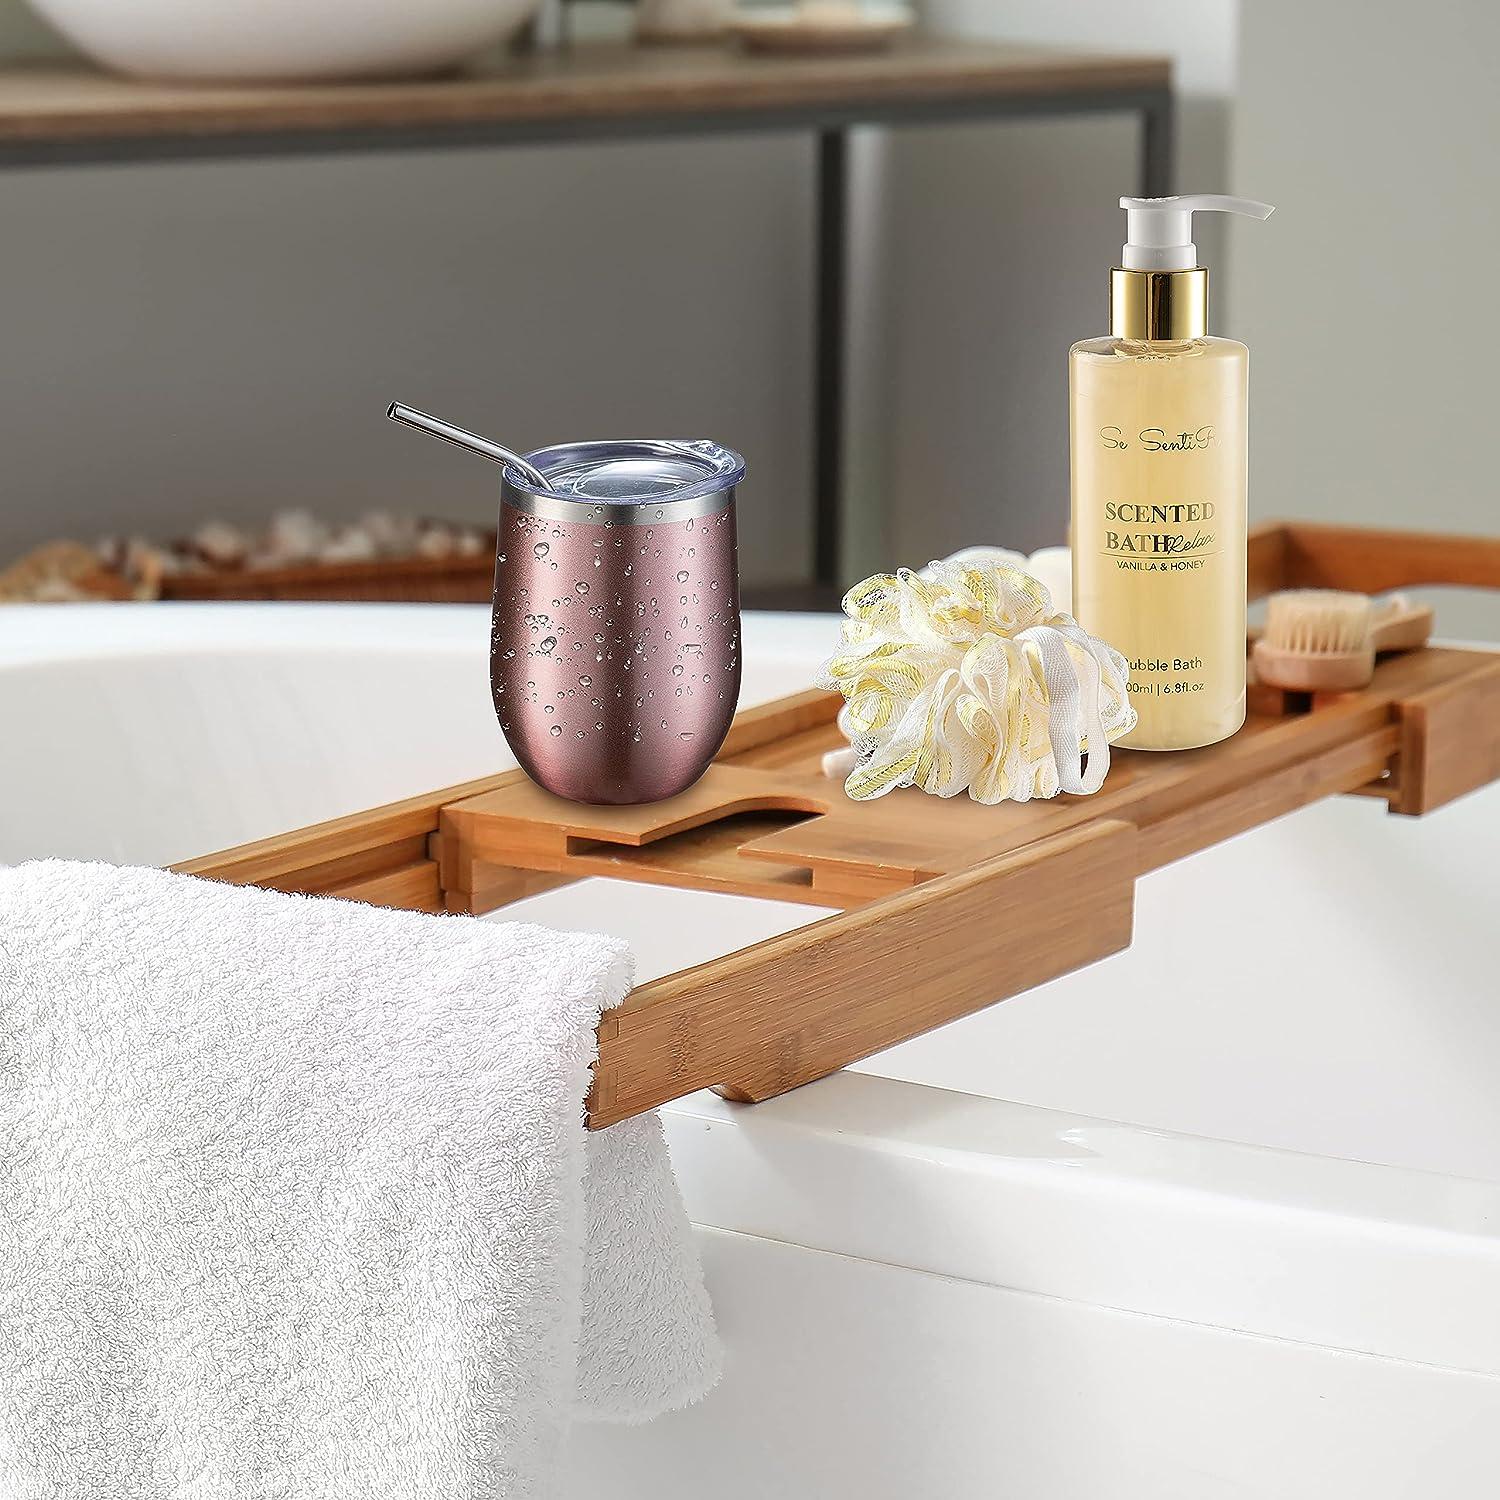  6pc Luxury Spa Gifts for Women - Tumbler Bath Gift